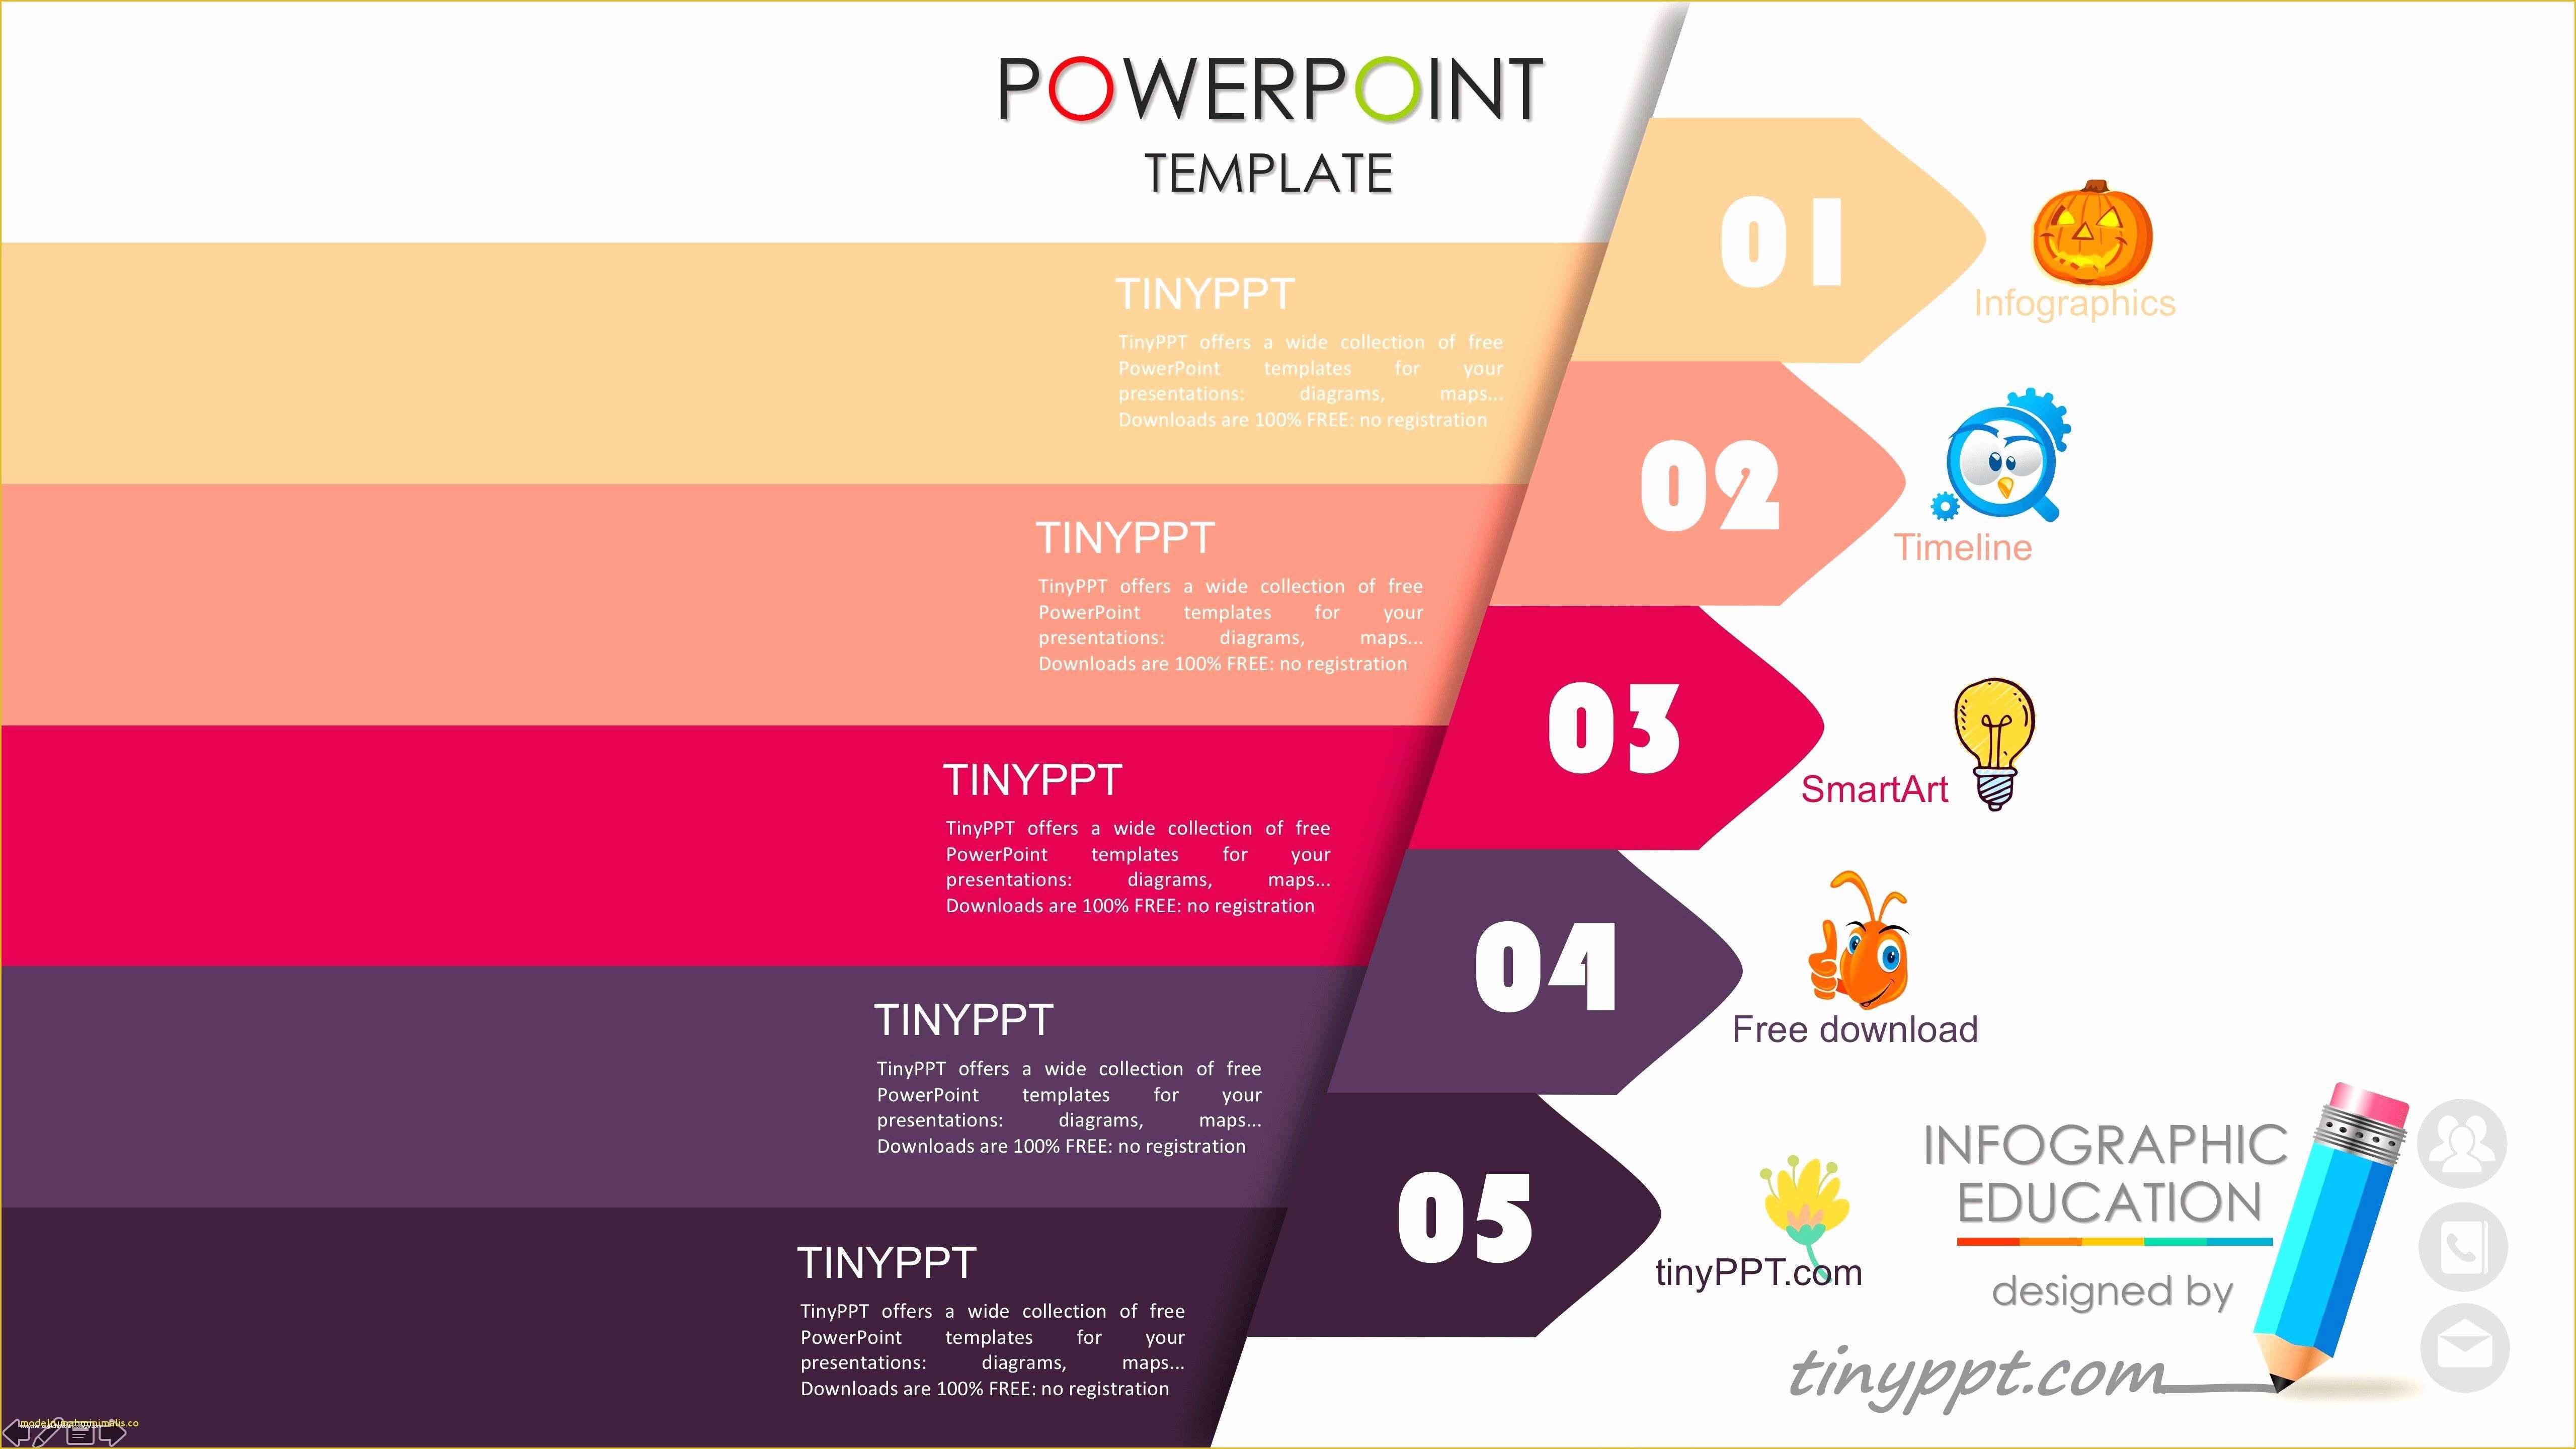 Free Typography Templates Of Lovely Awesome Powerpoint Templates